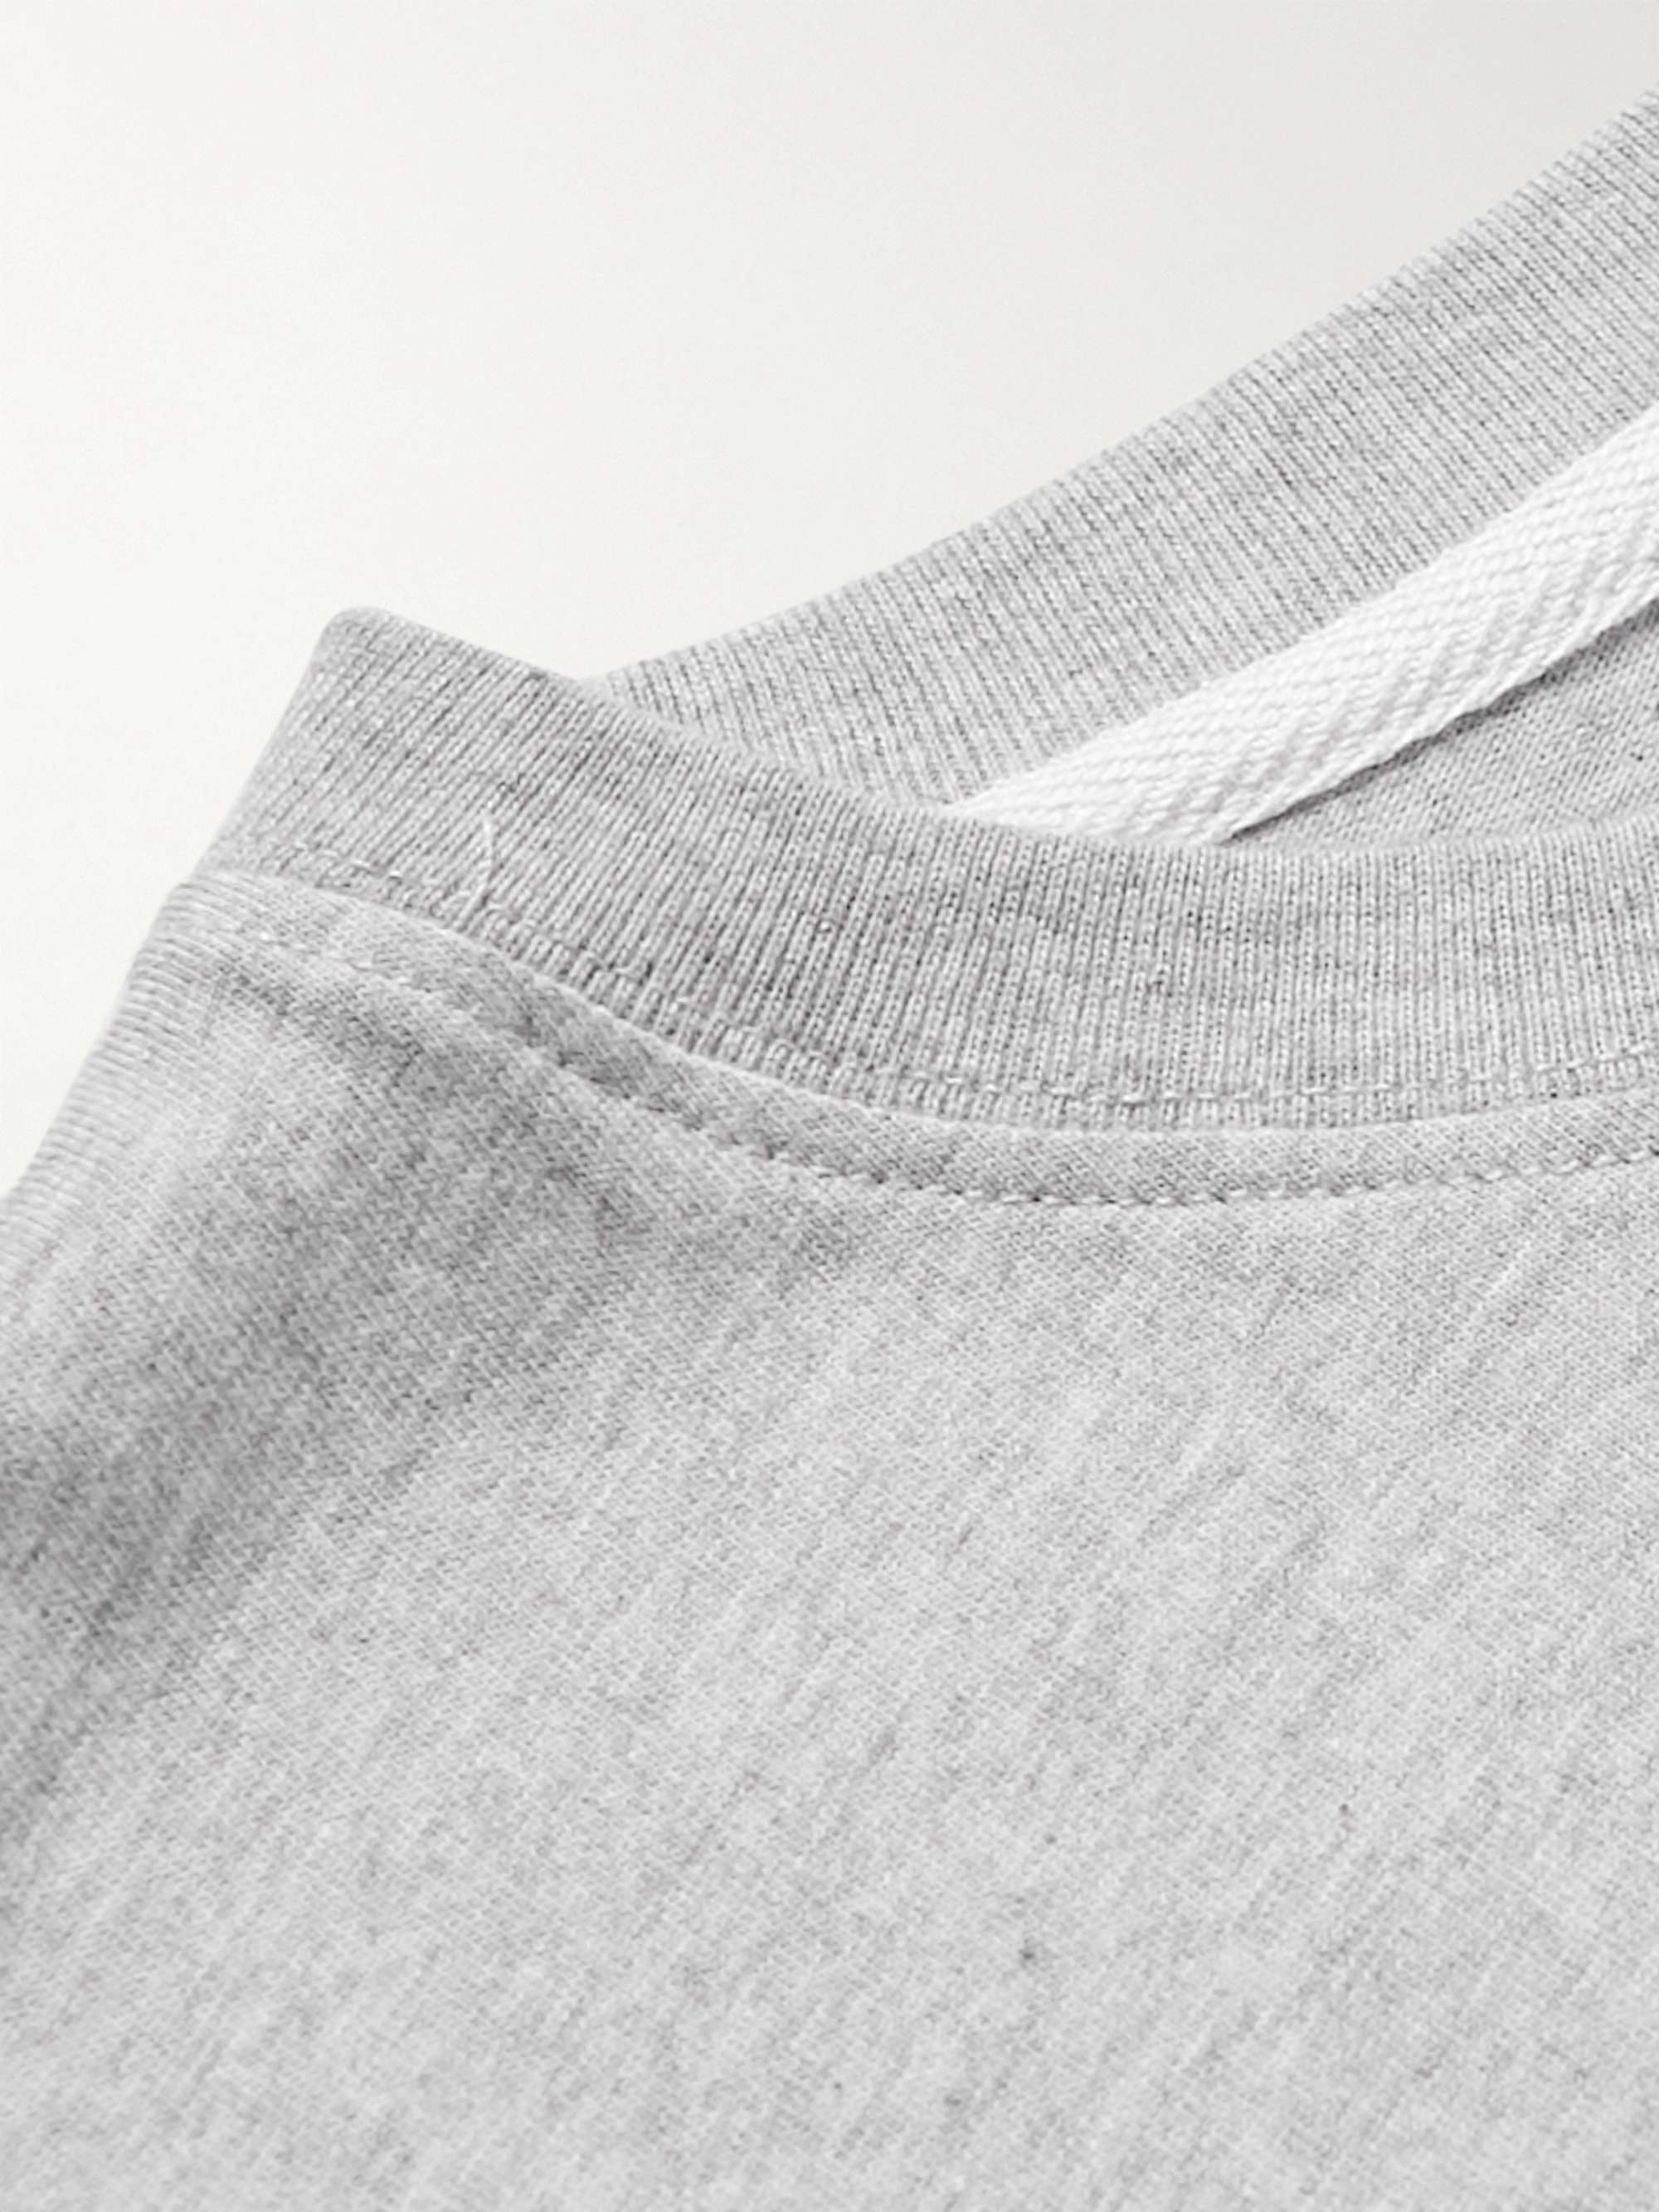 NORSE PROJECTS Niels Organic Cotton-Jersey T-Shirt for Men | MR PORTER